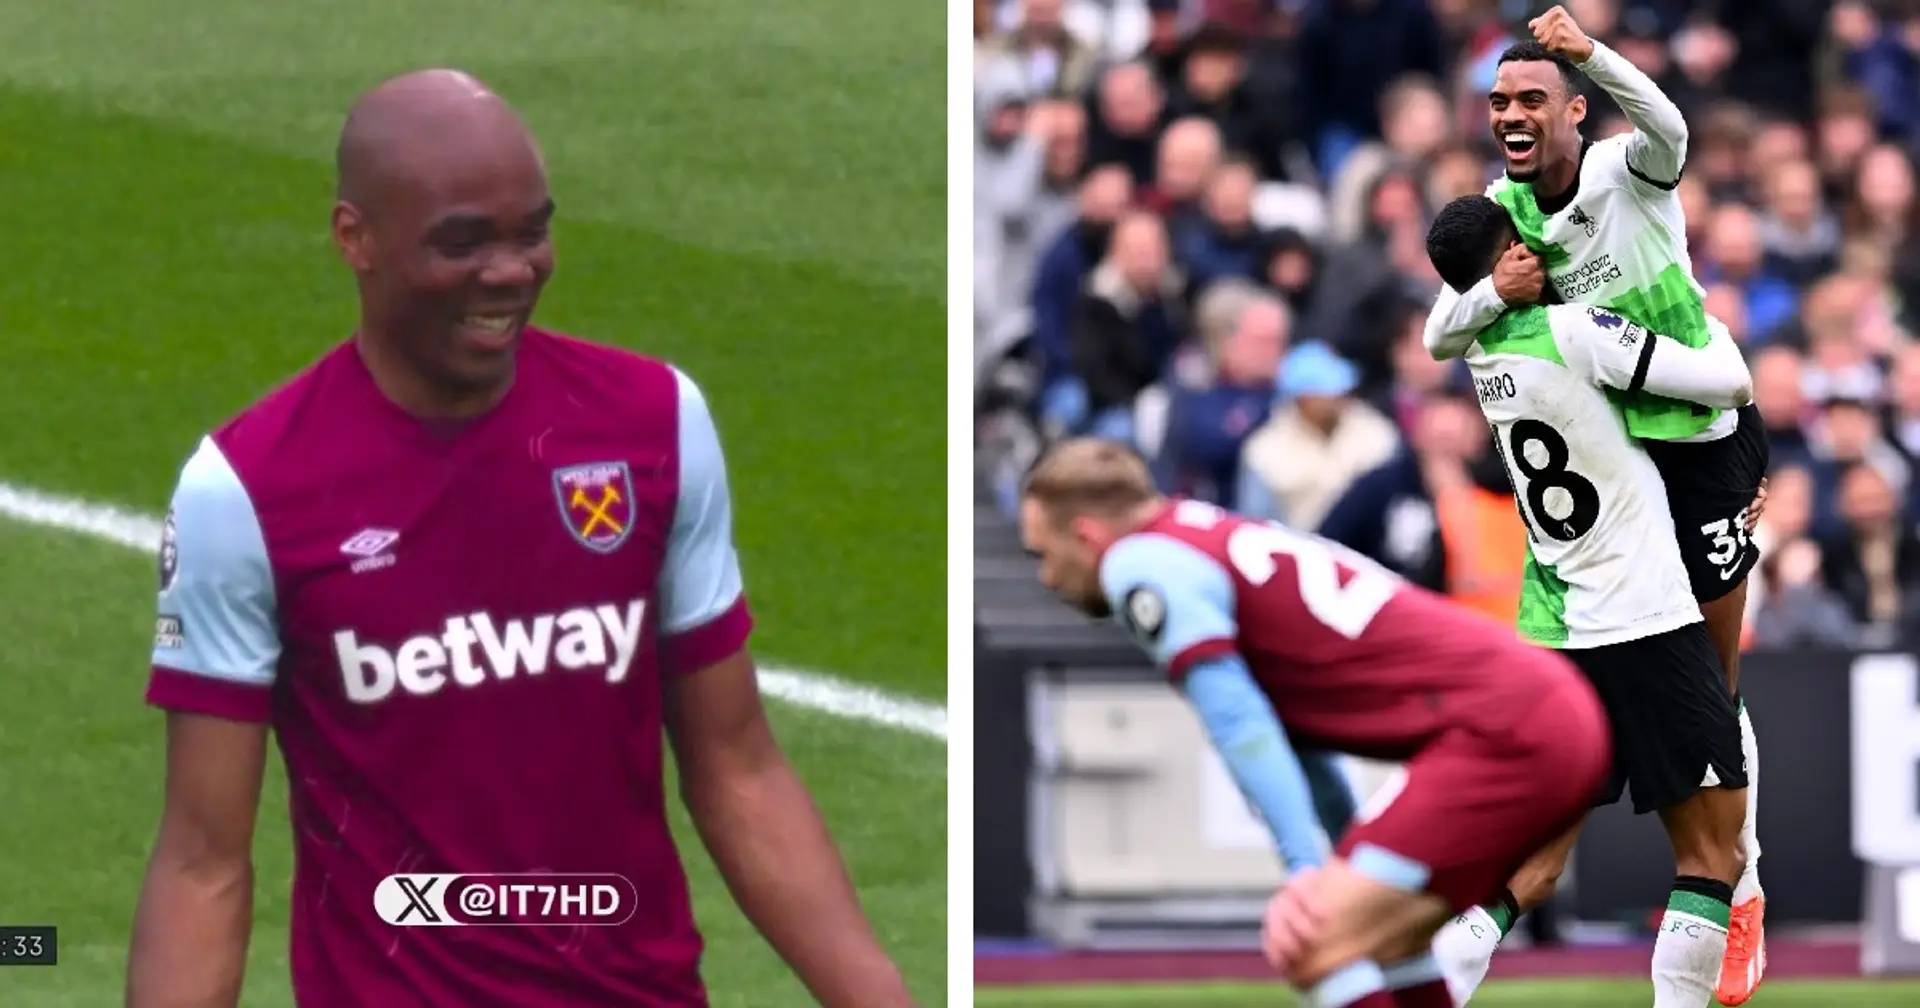 'Great tiki-taka play from West Ham': Fans react as Liverpool take the lead through bizarre hammers own-goal